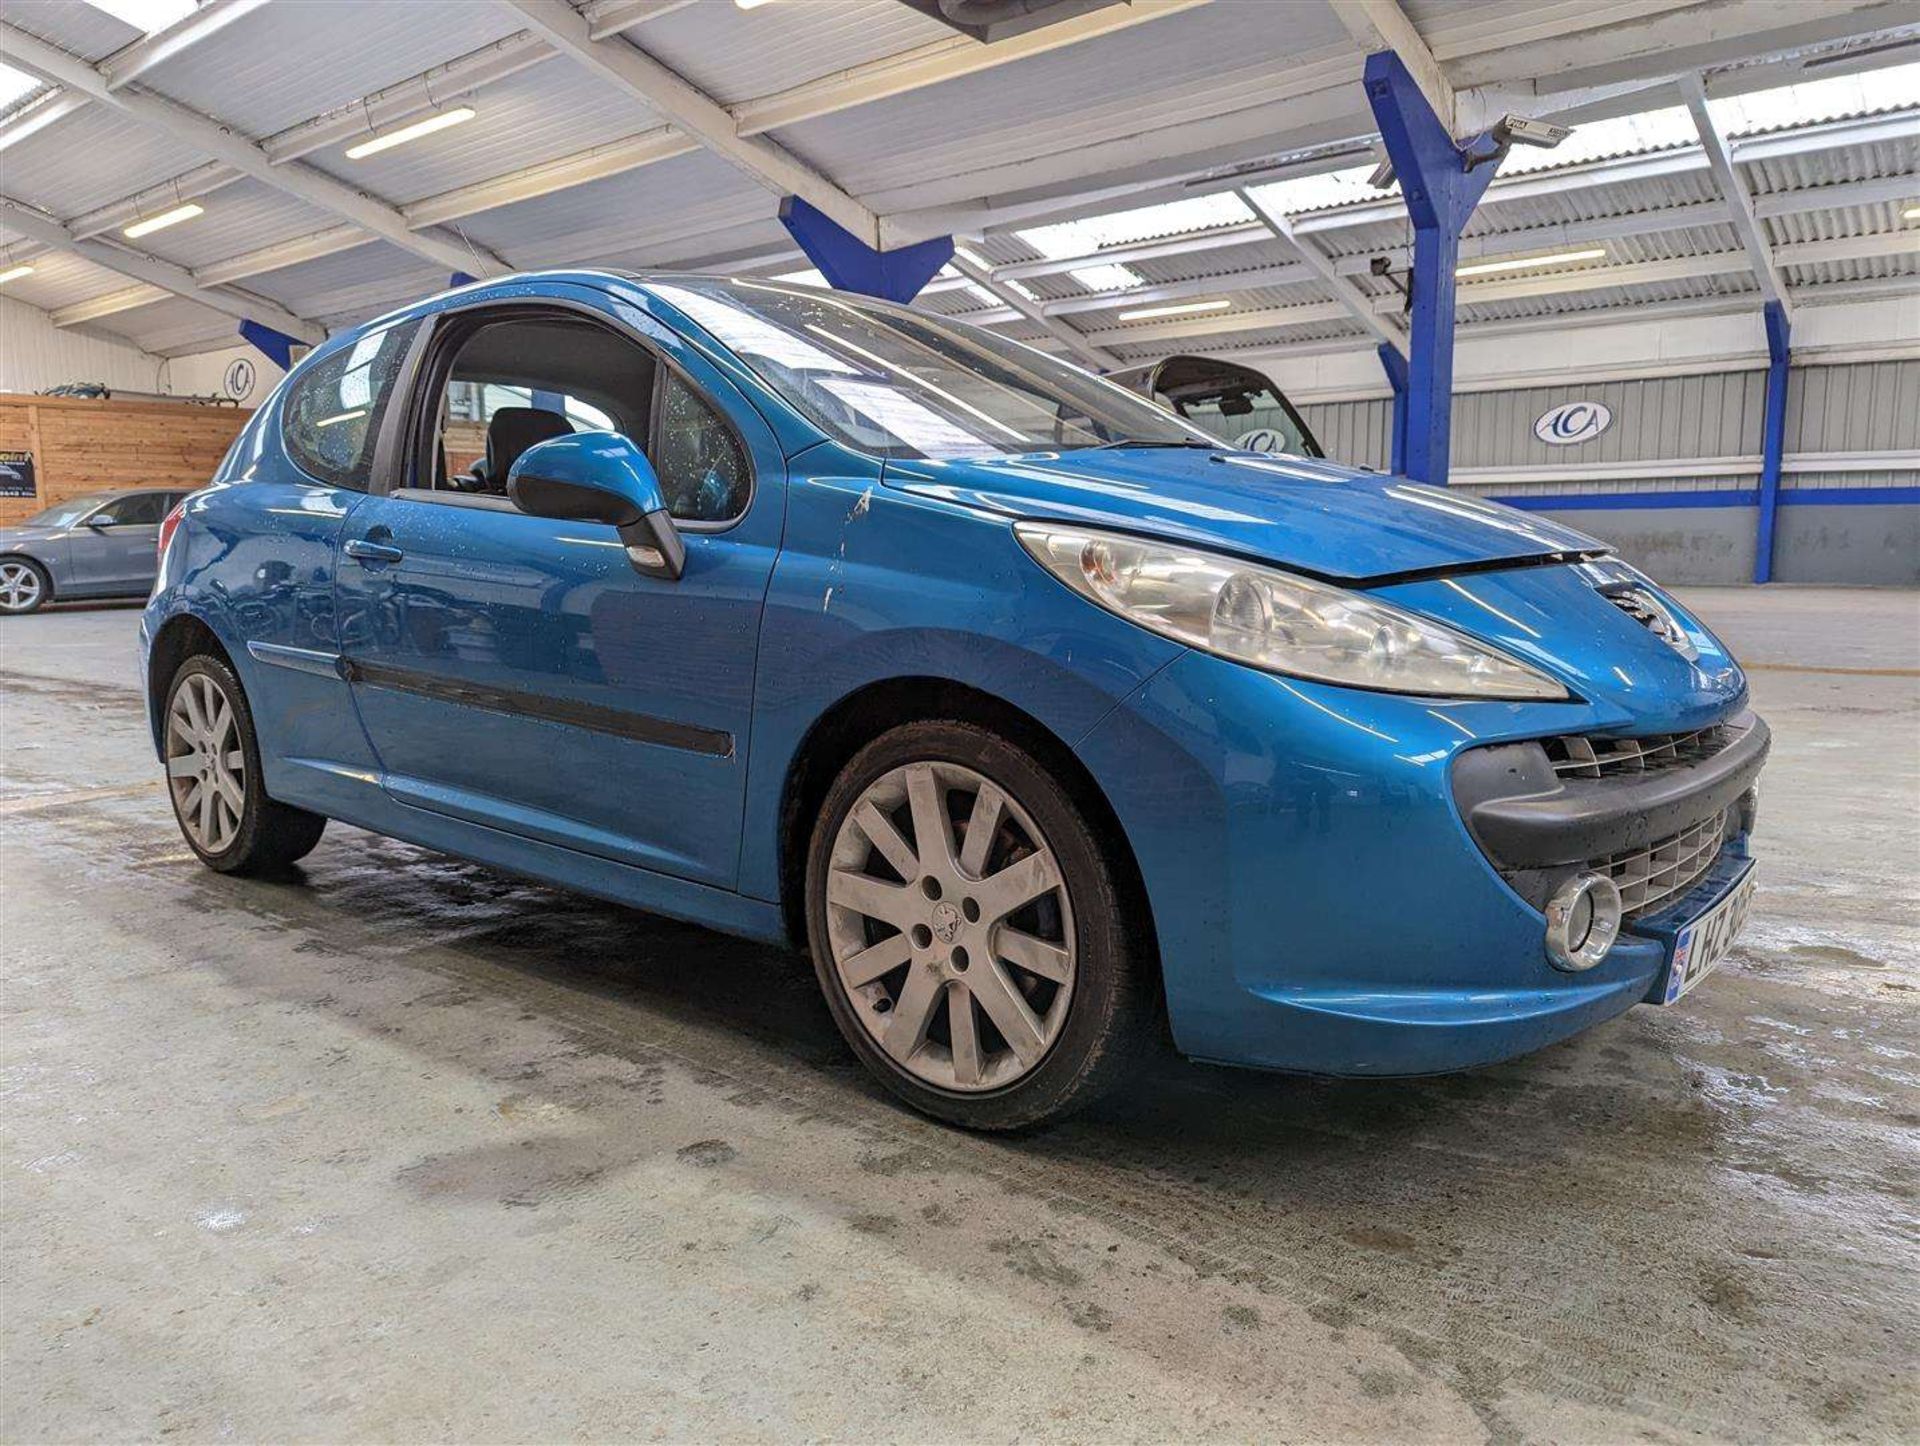 2007 PEUGEOT 207 GT HDI 110 - Image 10 of 30